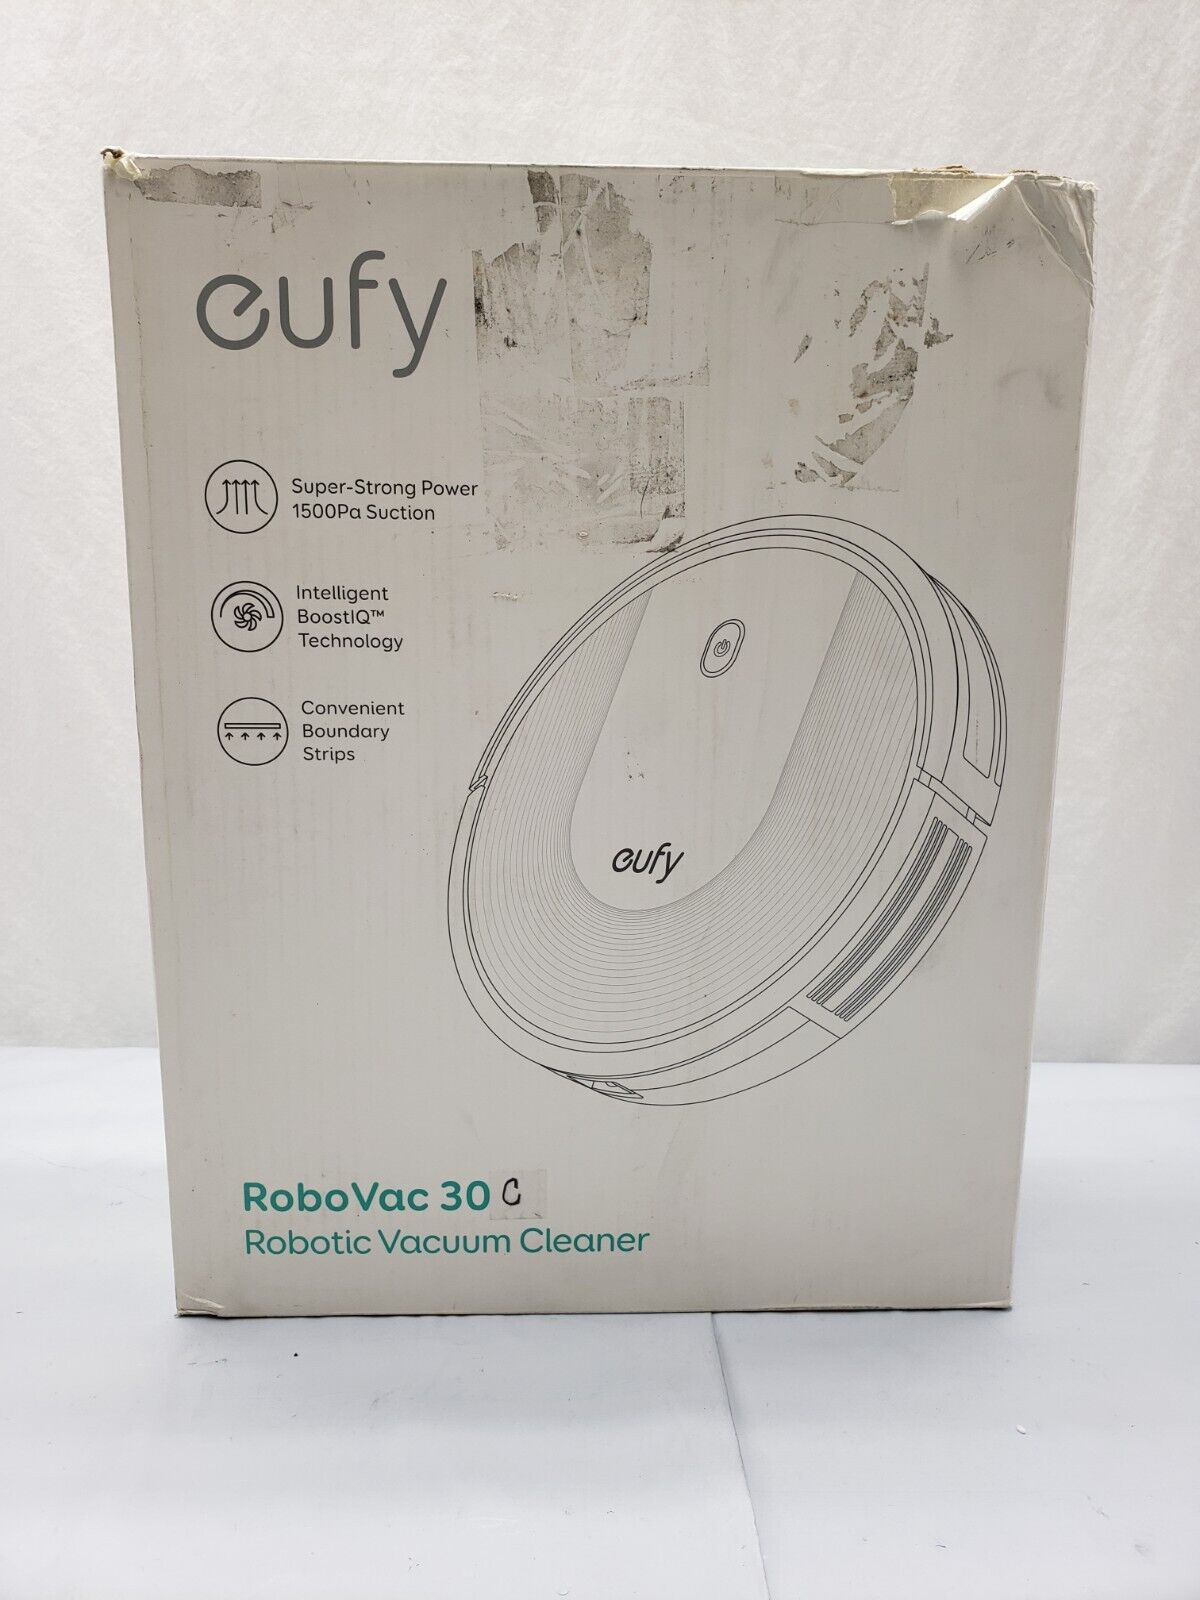 Unlock the Power: How to Connect Eufy Robovac to Wifi